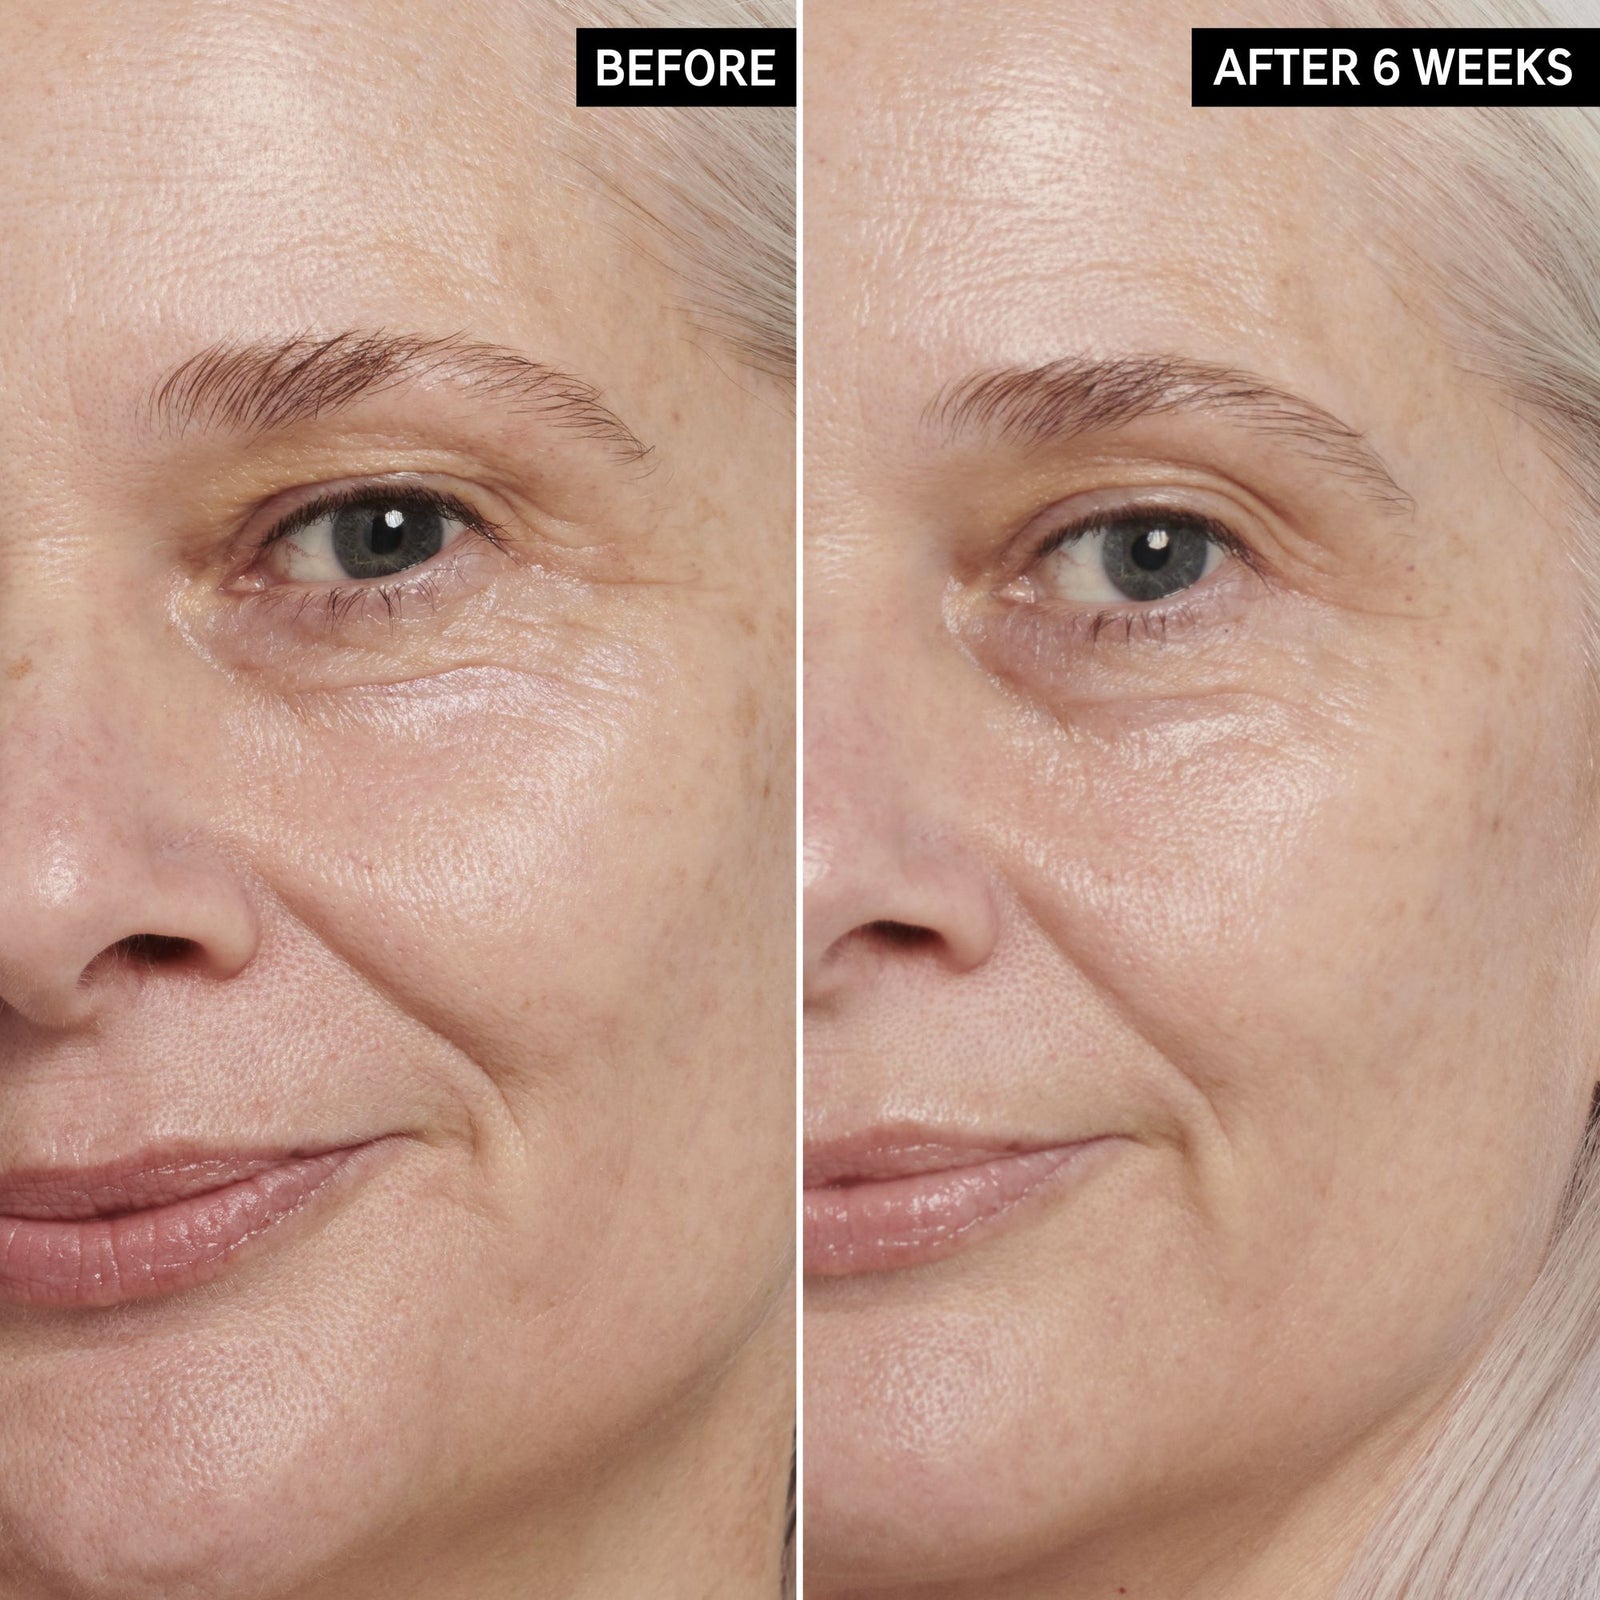 Two images of a mature female model's face side by side to show before and after using Retinol Eye Cream